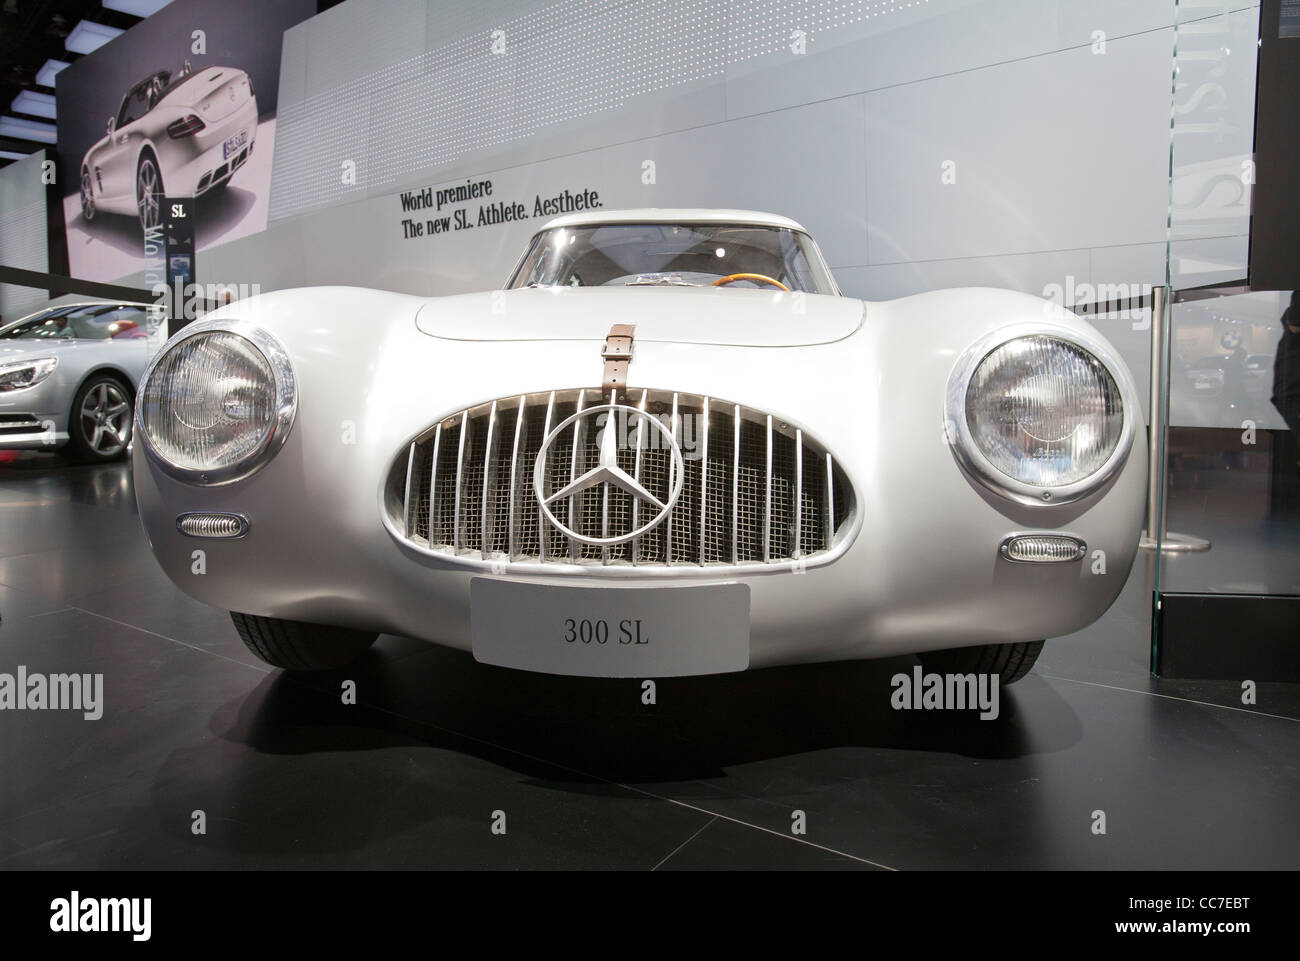 Detroit, Michigan - The 1952 Mercedes 300SL race car on display at the North American International Auto Show. Stock Photo